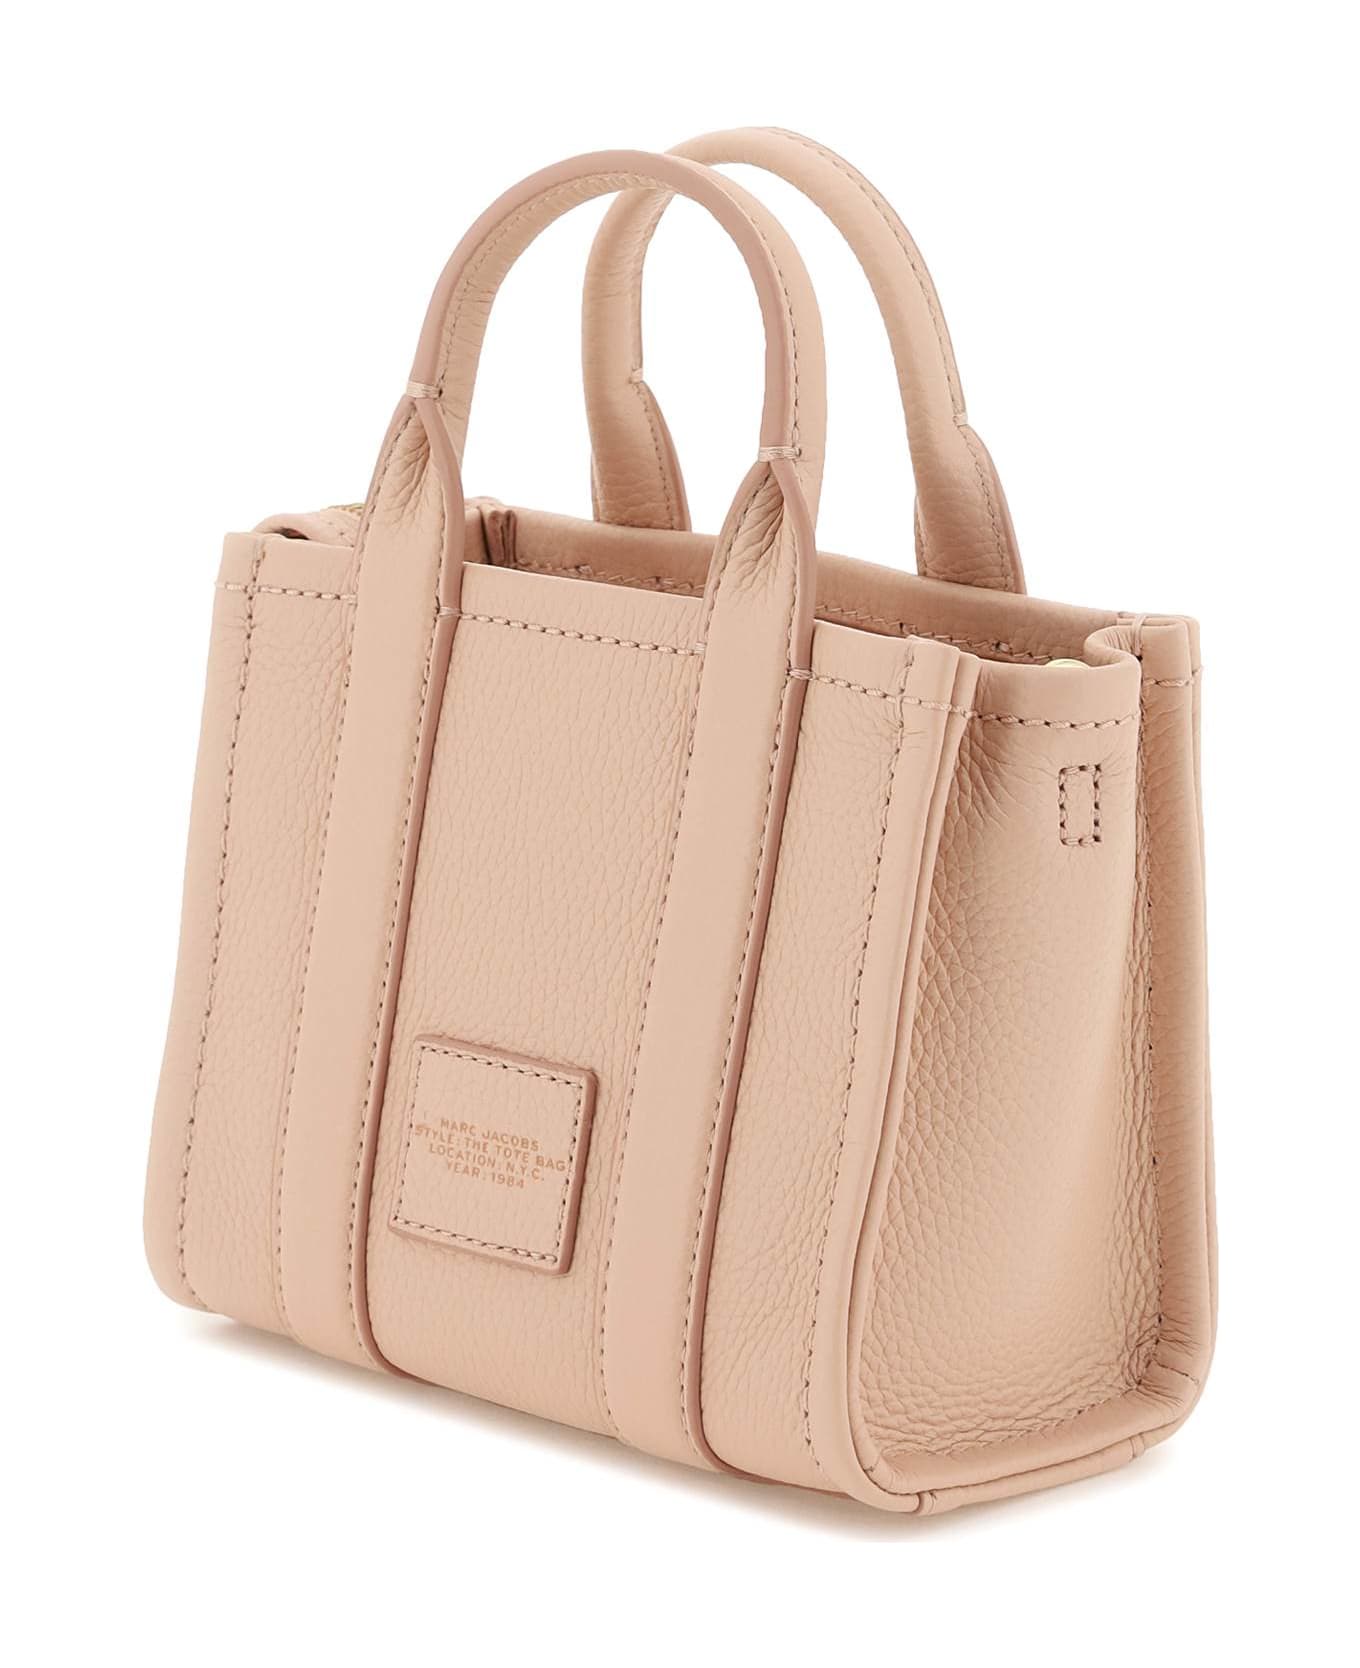 Marc Jacobs The Leather Micro Tote Bag - Rose トートバッグ